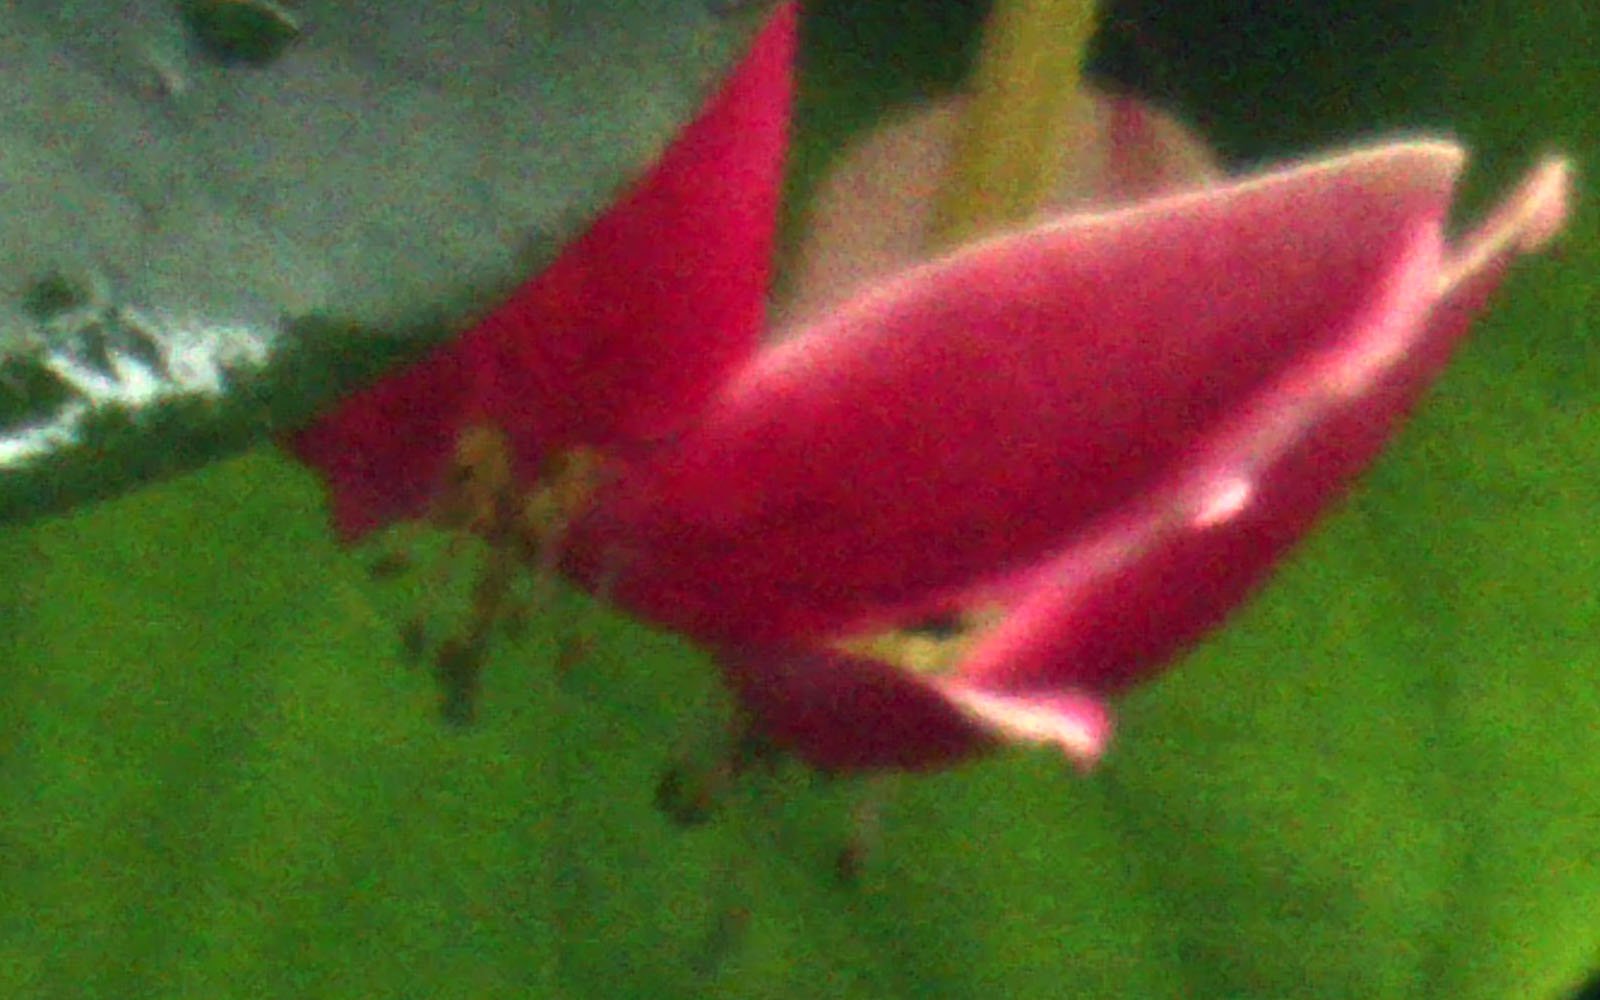 A blurry image of a single pink flower with a deep magenta hue, contrasted against a softly focused green background.